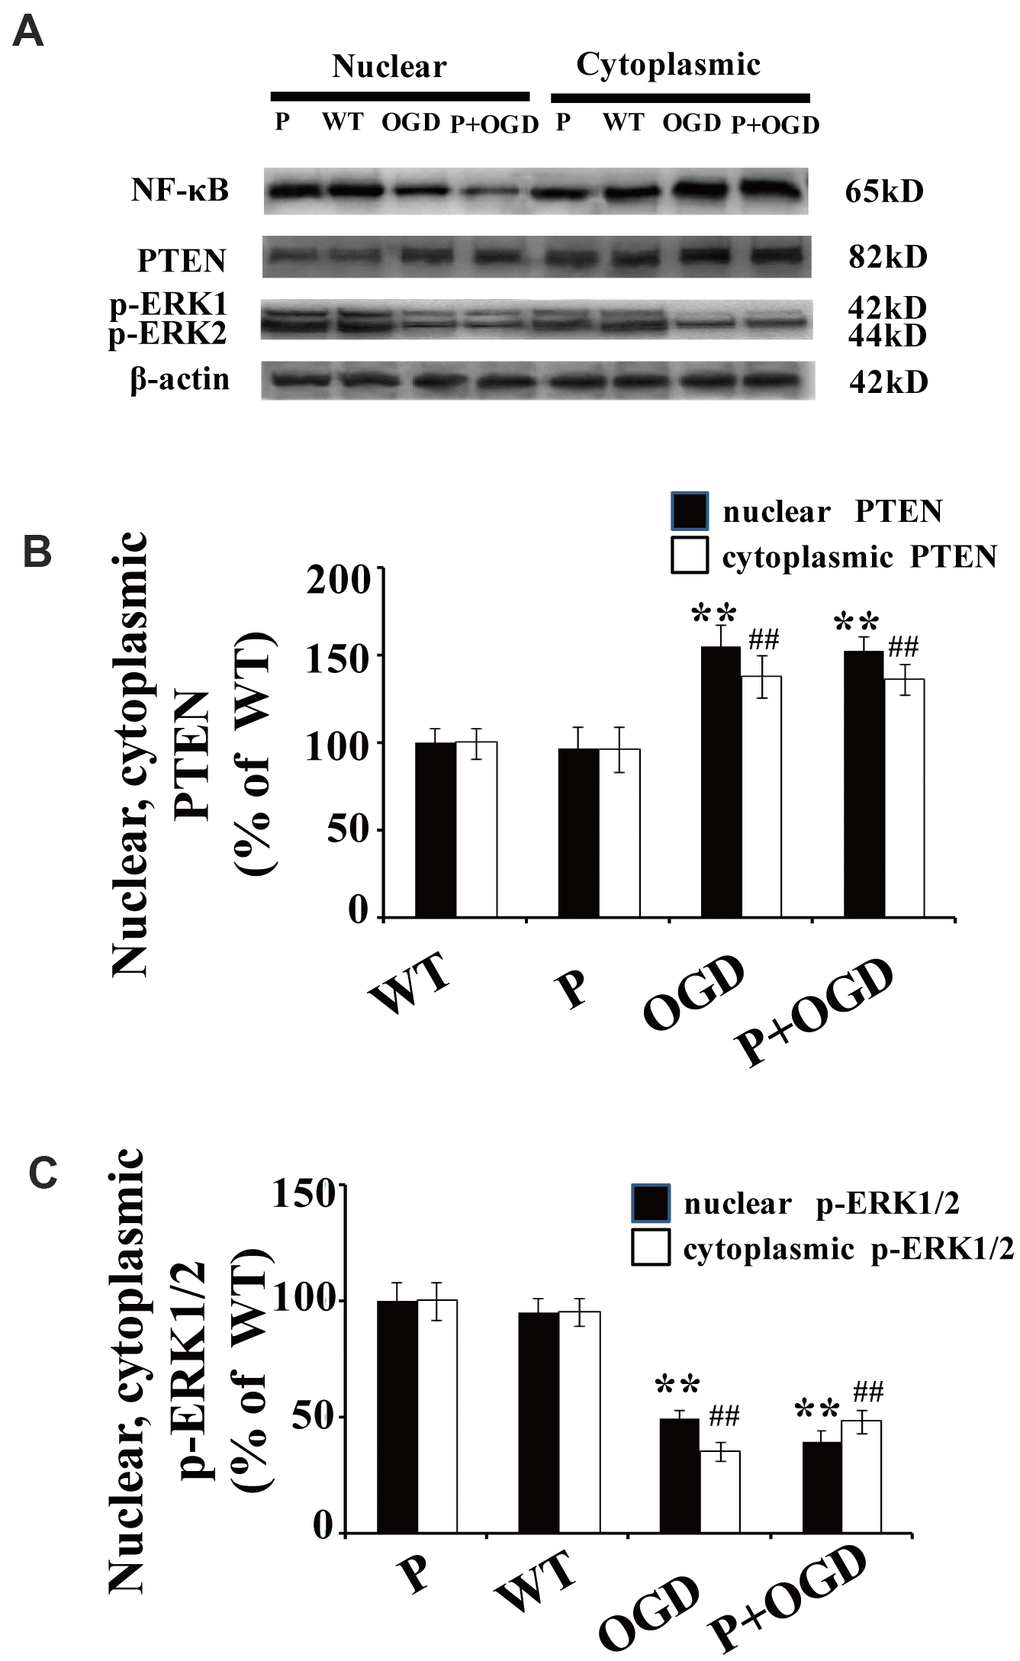 PTEN nuclear translocation is an essential step in NF-κB activation. (A) The expression of NF-κB and p-REK1/2 after PDTC treatment. Western blot of cytoplasmic and nuclear fractions shows that the nuclear translocation of NF-κB decreased in PDTC-treated neurons, while there was no obvious change in the nuclear translocation of PTEN or the expression of p-ERK1/2. (B) Quantification of nuclear and cytoplasmic PTEN expression, normalized against normal neurons. (C) Quantification of nuclear and cytoplasmic p-ERK1/2 expression, normalized against GFP-PTENWT neurons. n = 5 in each column and ** p WT neurons, K13R: GFP-PTENK13R neurons; P: PDTC.